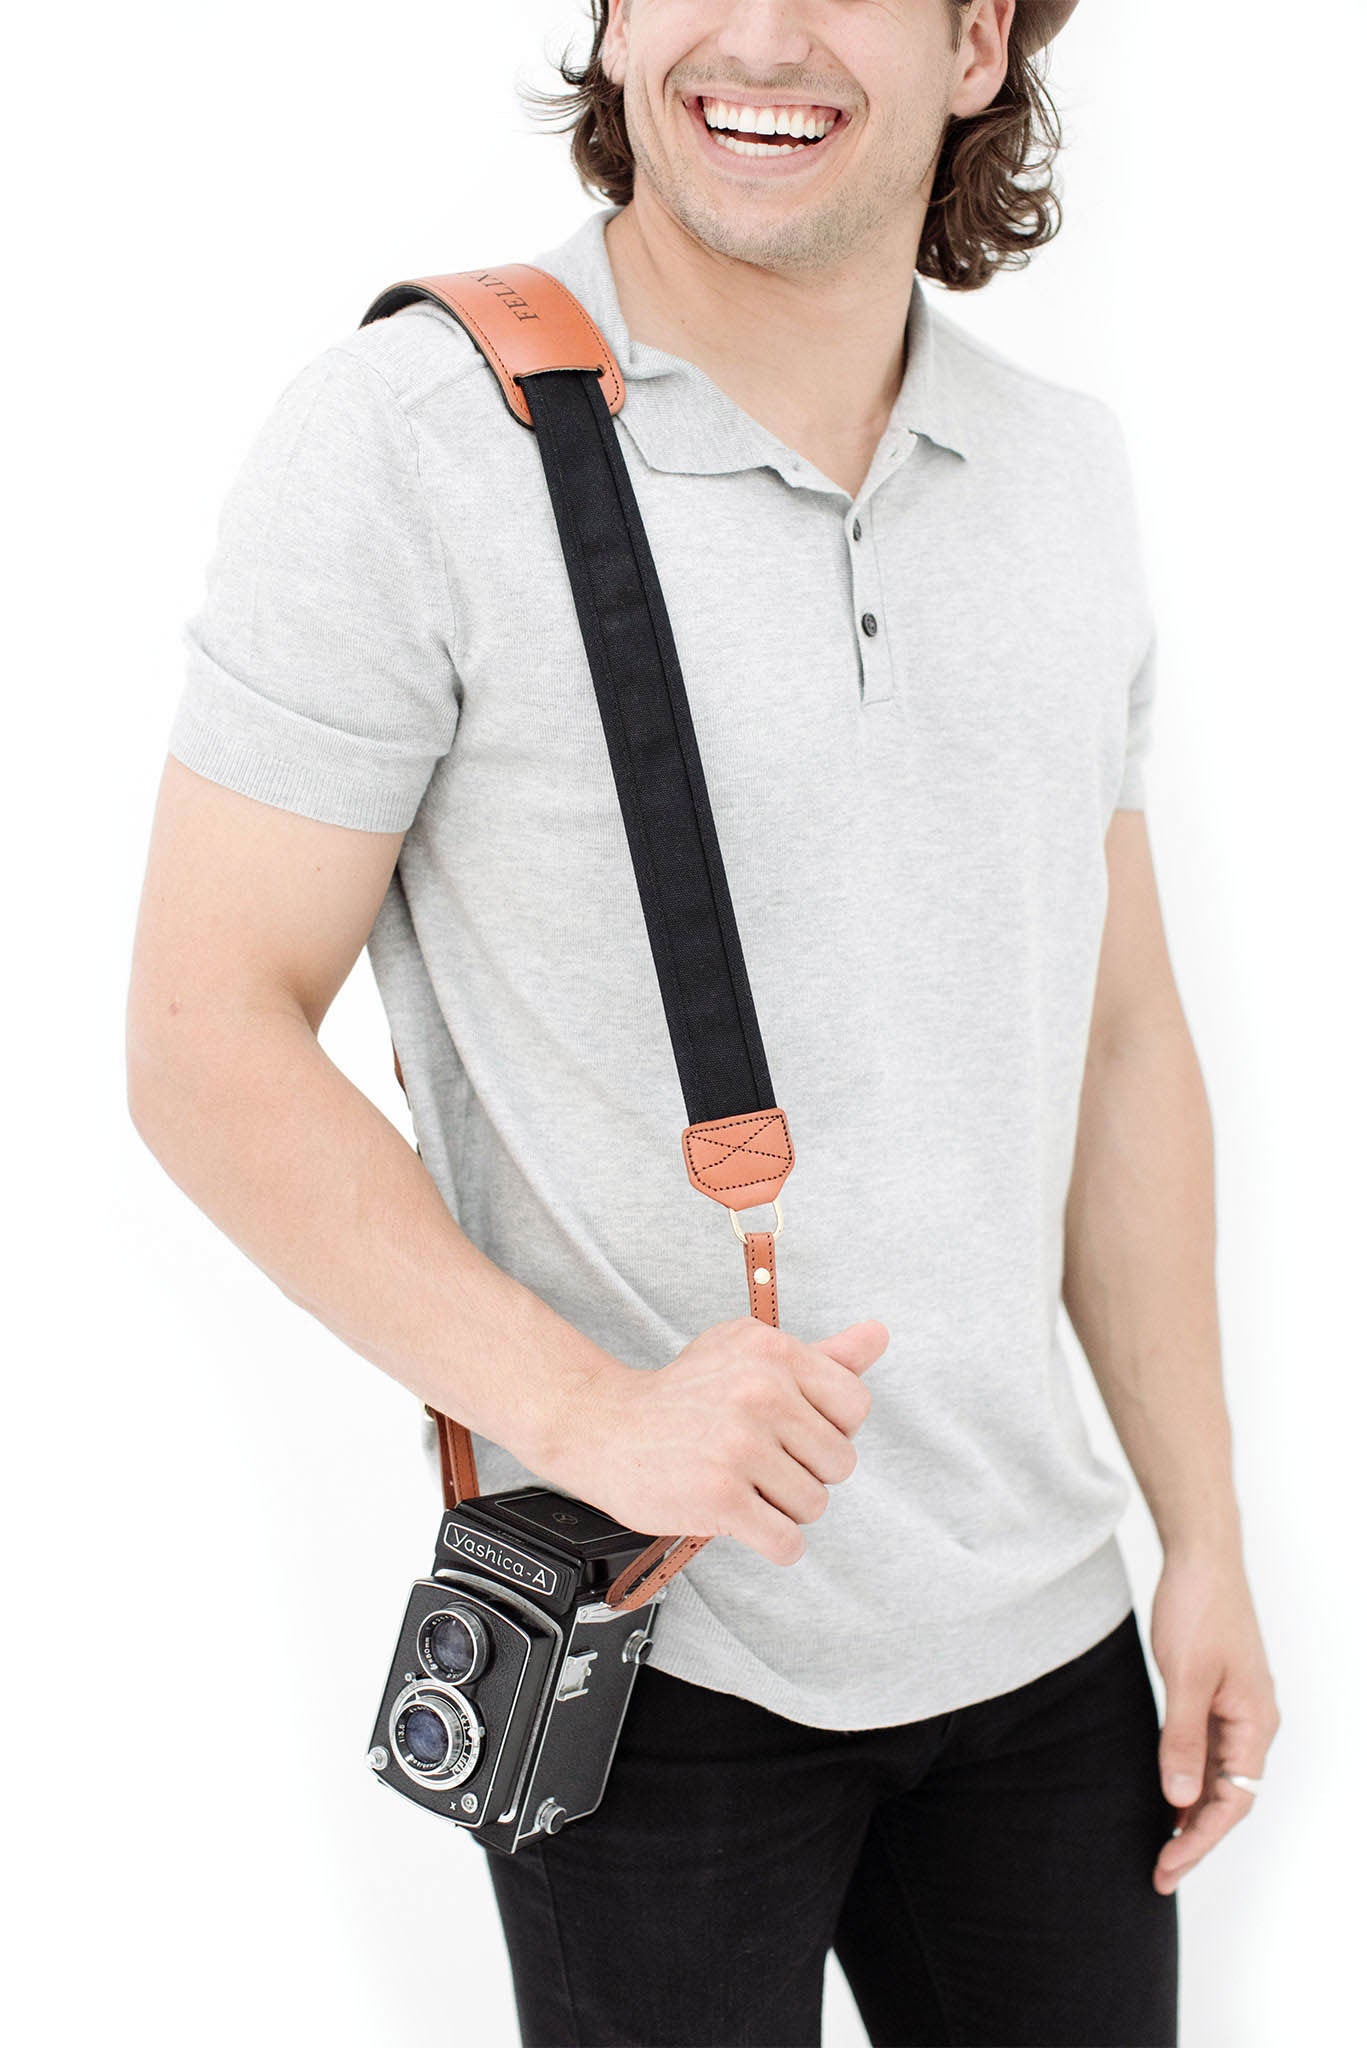 FOTO | Black Fotostrap - a black canvas and genuine leather camera strap that can be personalized with a monogram or business logo, making it the perfect personalized gift! 